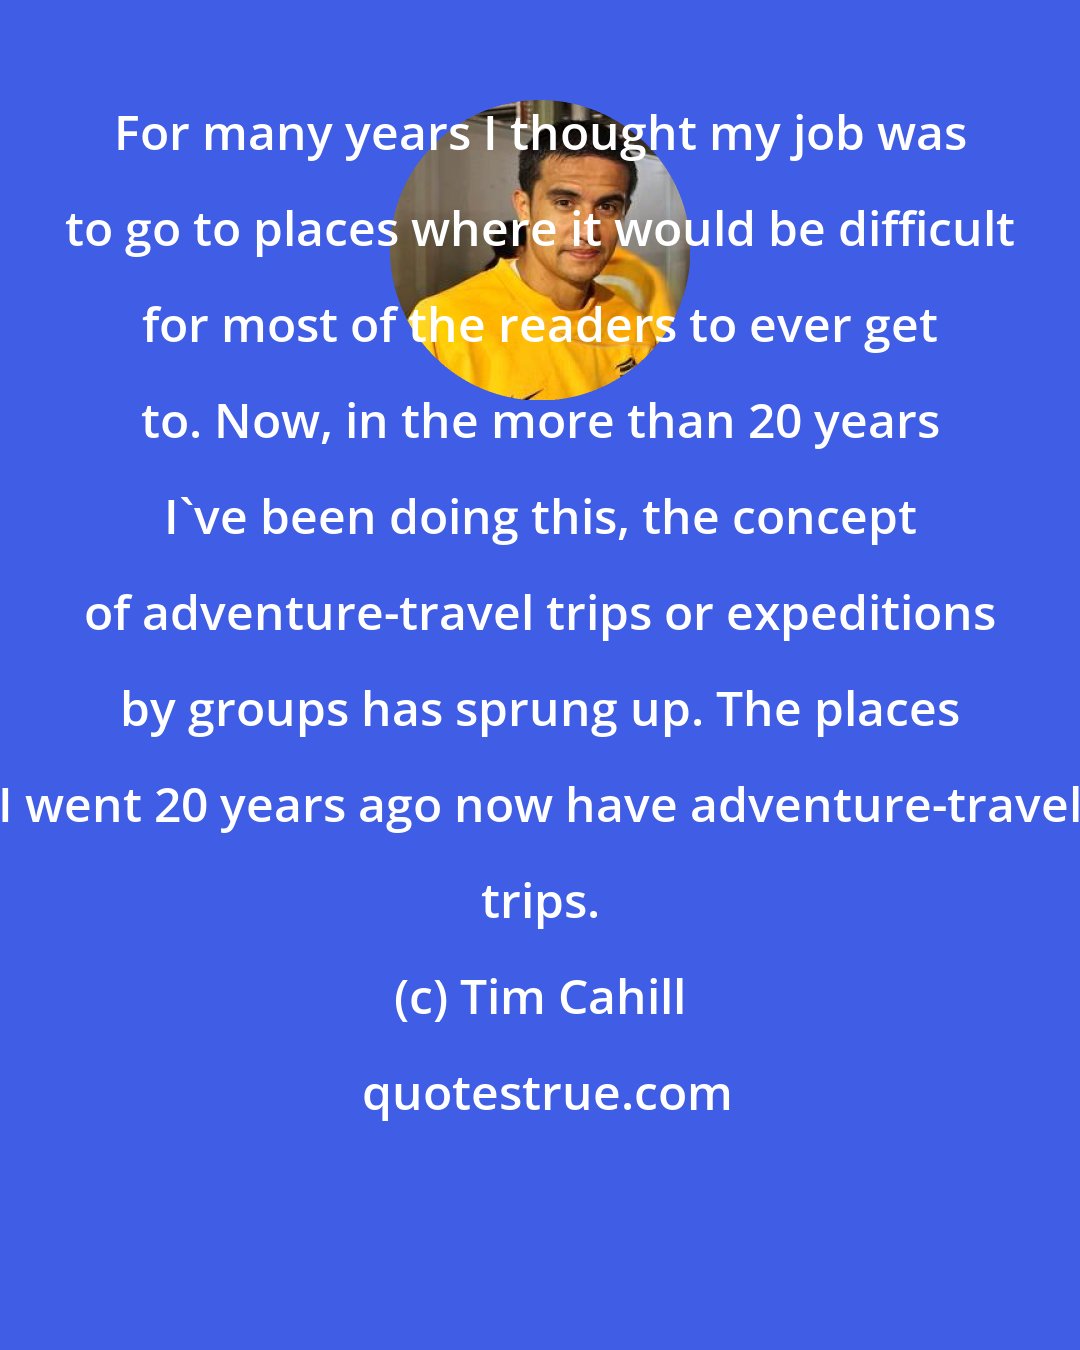 Tim Cahill: For many years I thought my job was to go to places where it would be difficult for most of the readers to ever get to. Now, in the more than 20 years I've been doing this, the concept of adventure-travel trips or expeditions by groups has sprung up. The places I went 20 years ago now have adventure-travel trips.